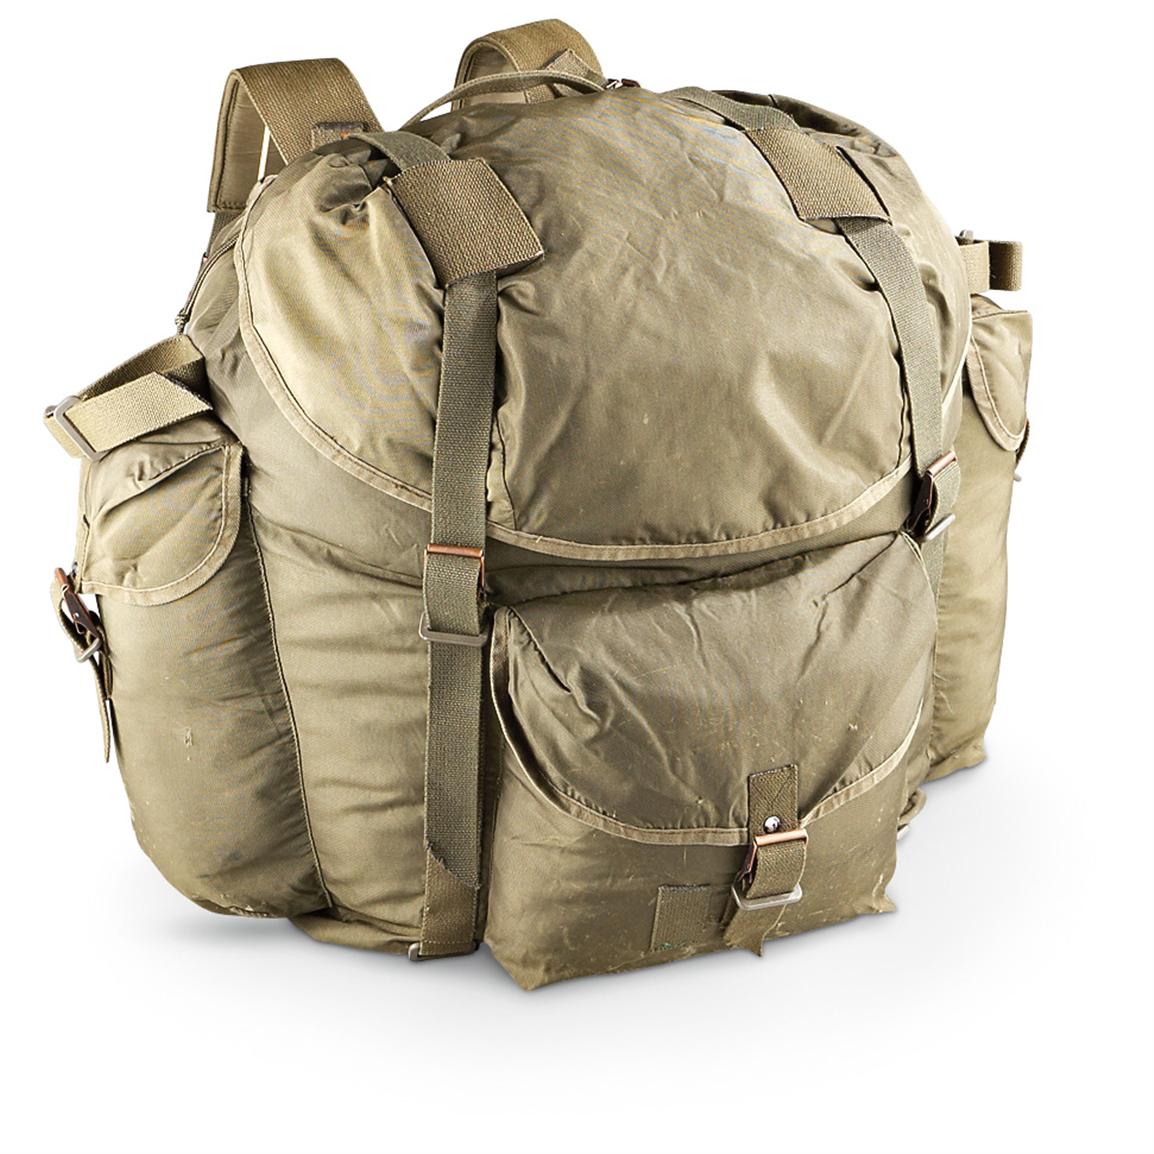 New Austrian Military Backpack, Olive Drab - 190530 ...